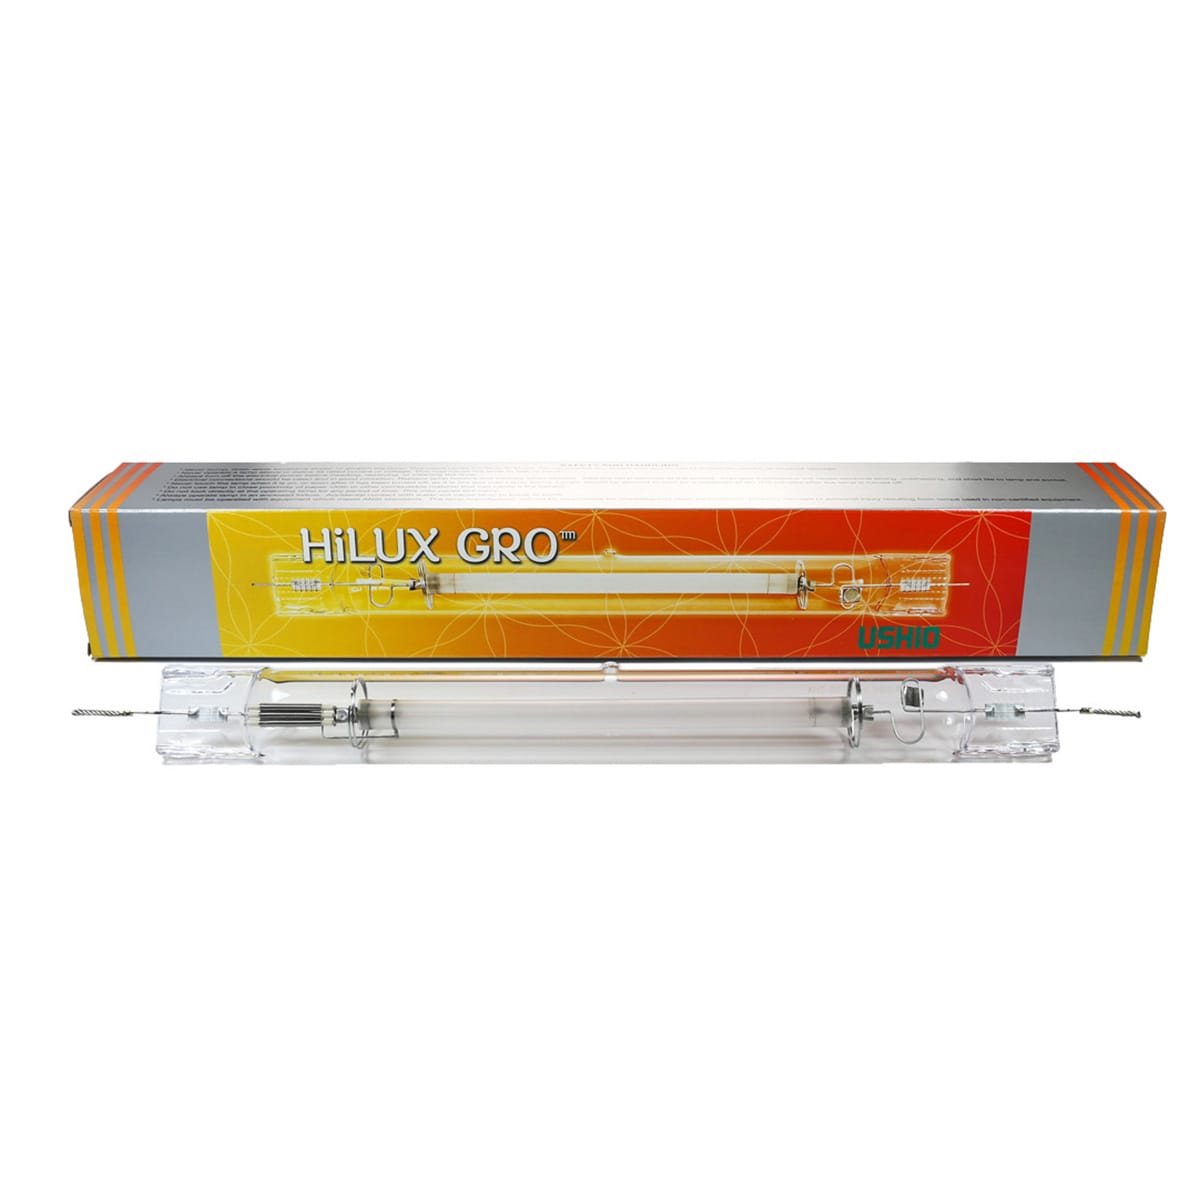 Hilux GRO 1000w HPS Lamp and Package